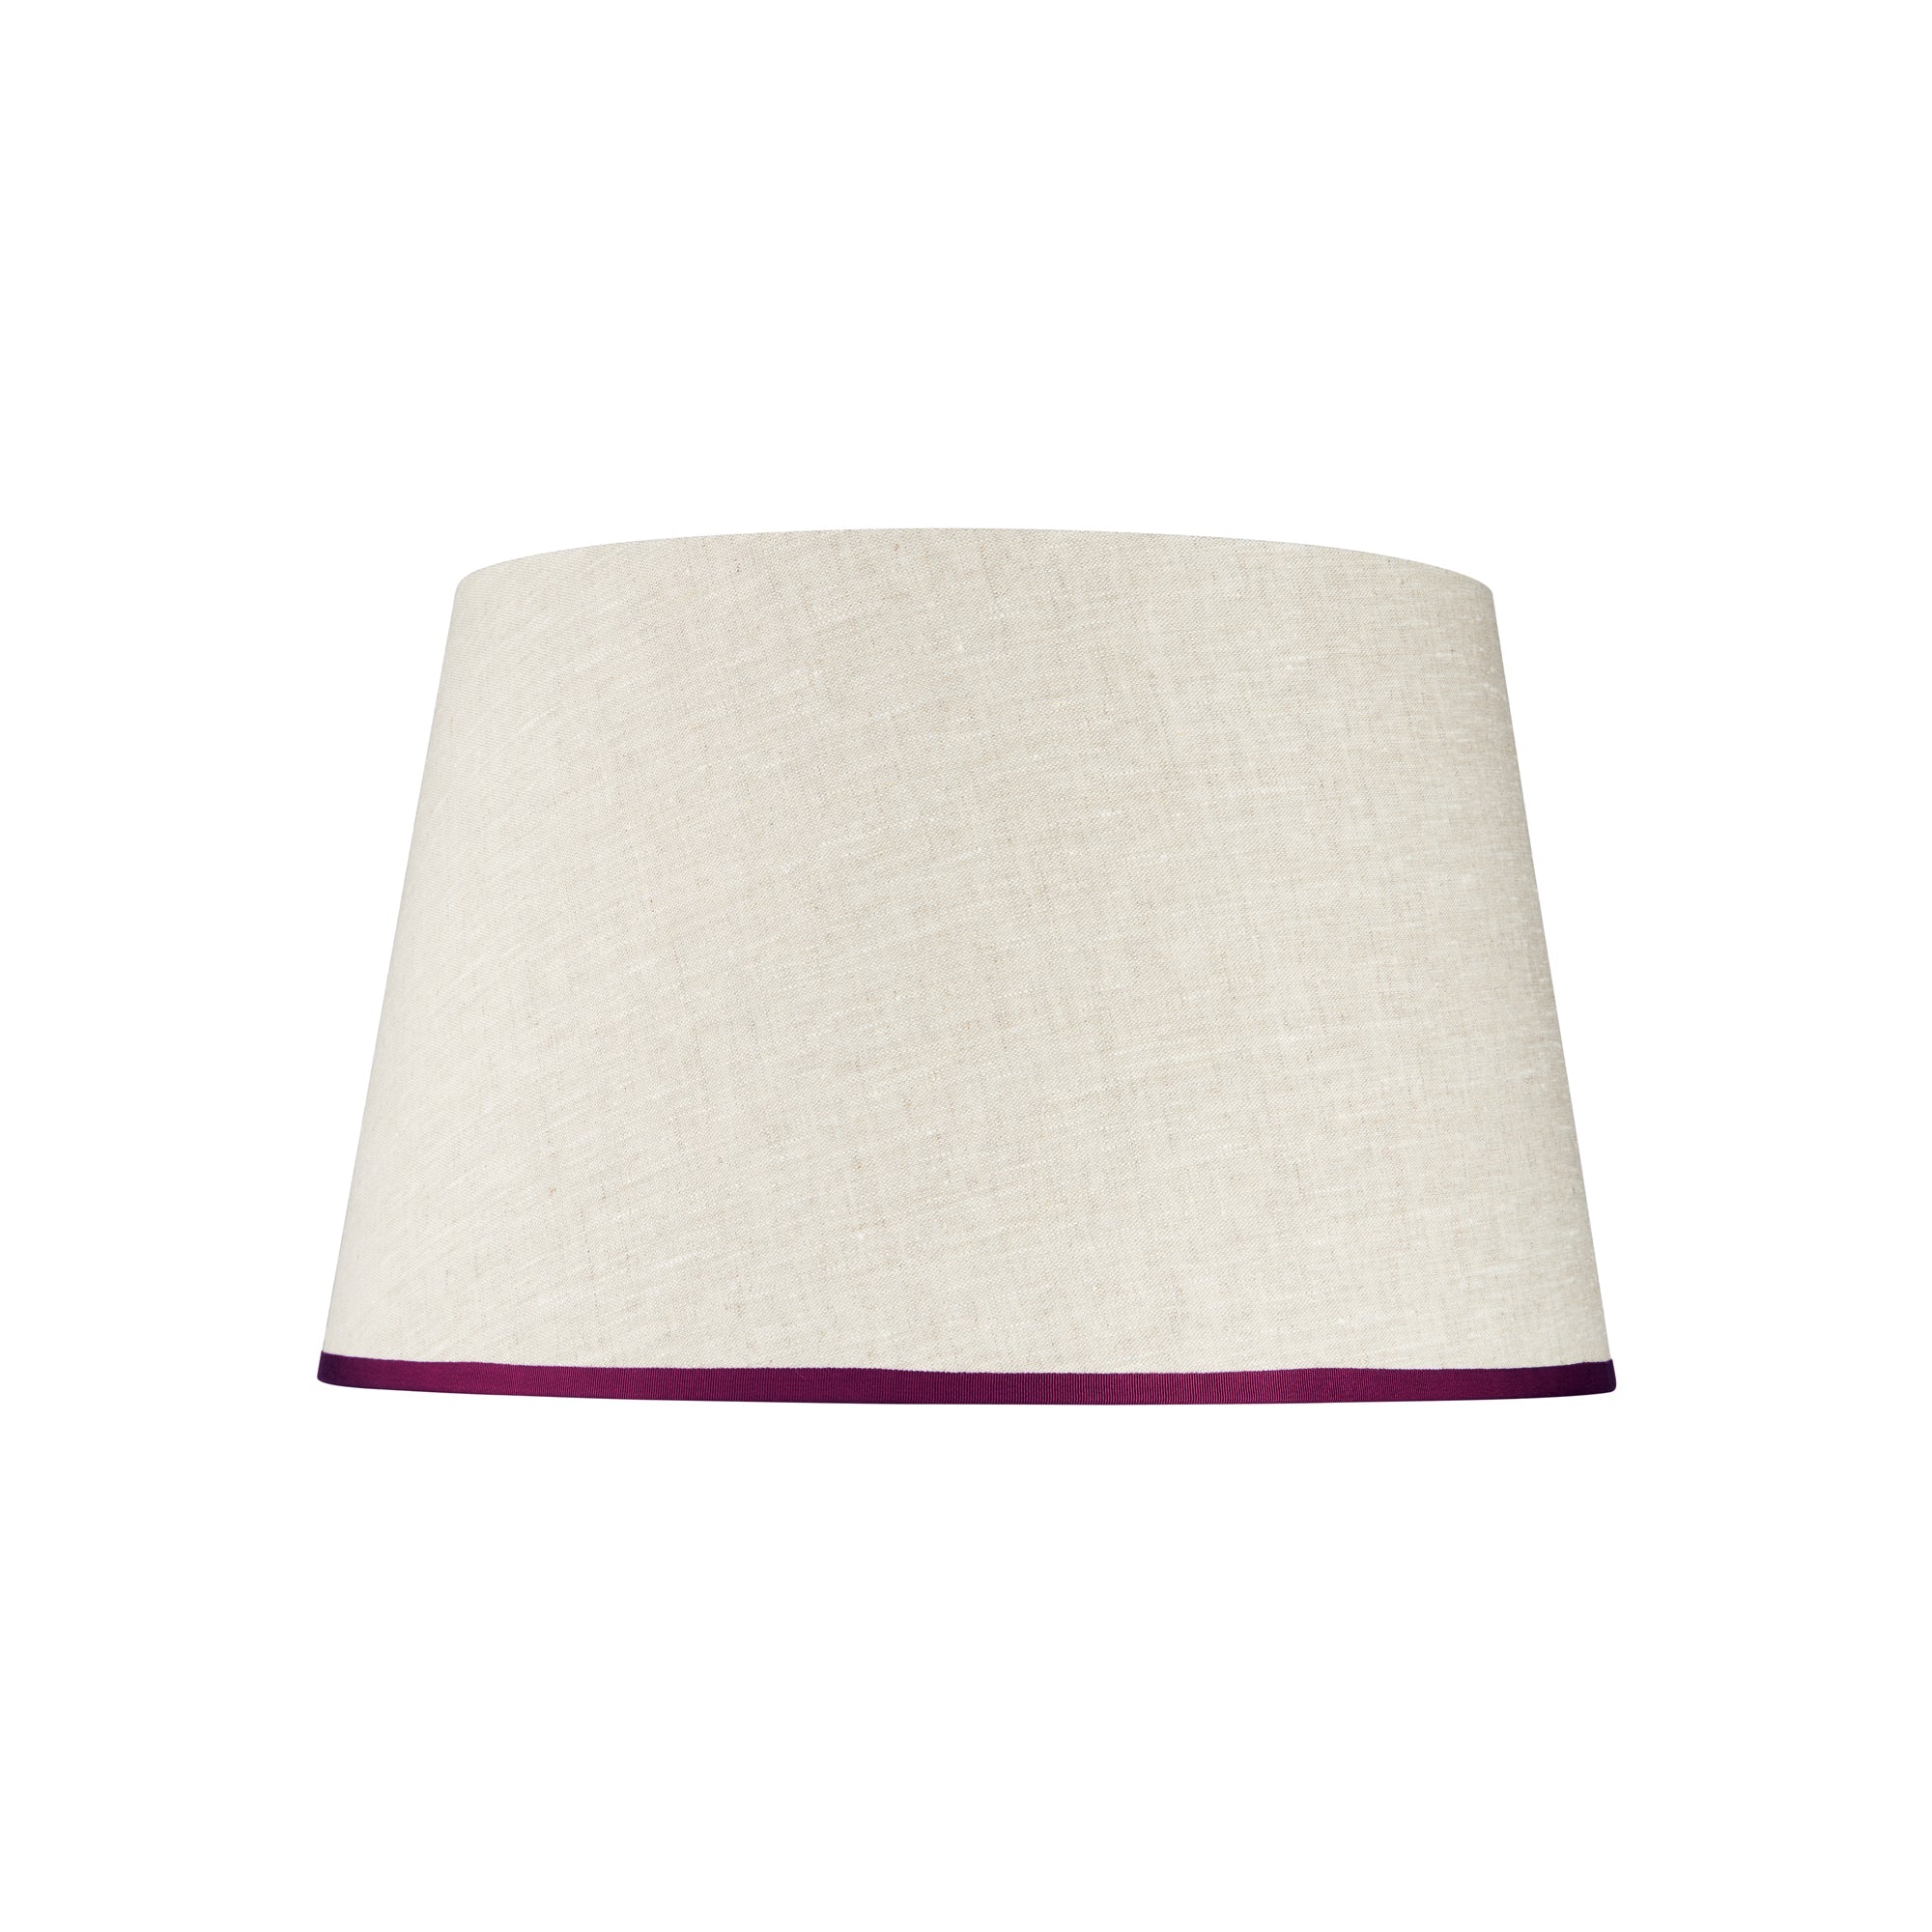 STRETCHED CREAM LINEN LAMPSHADE WITH RIBBED BLUSH TRIM